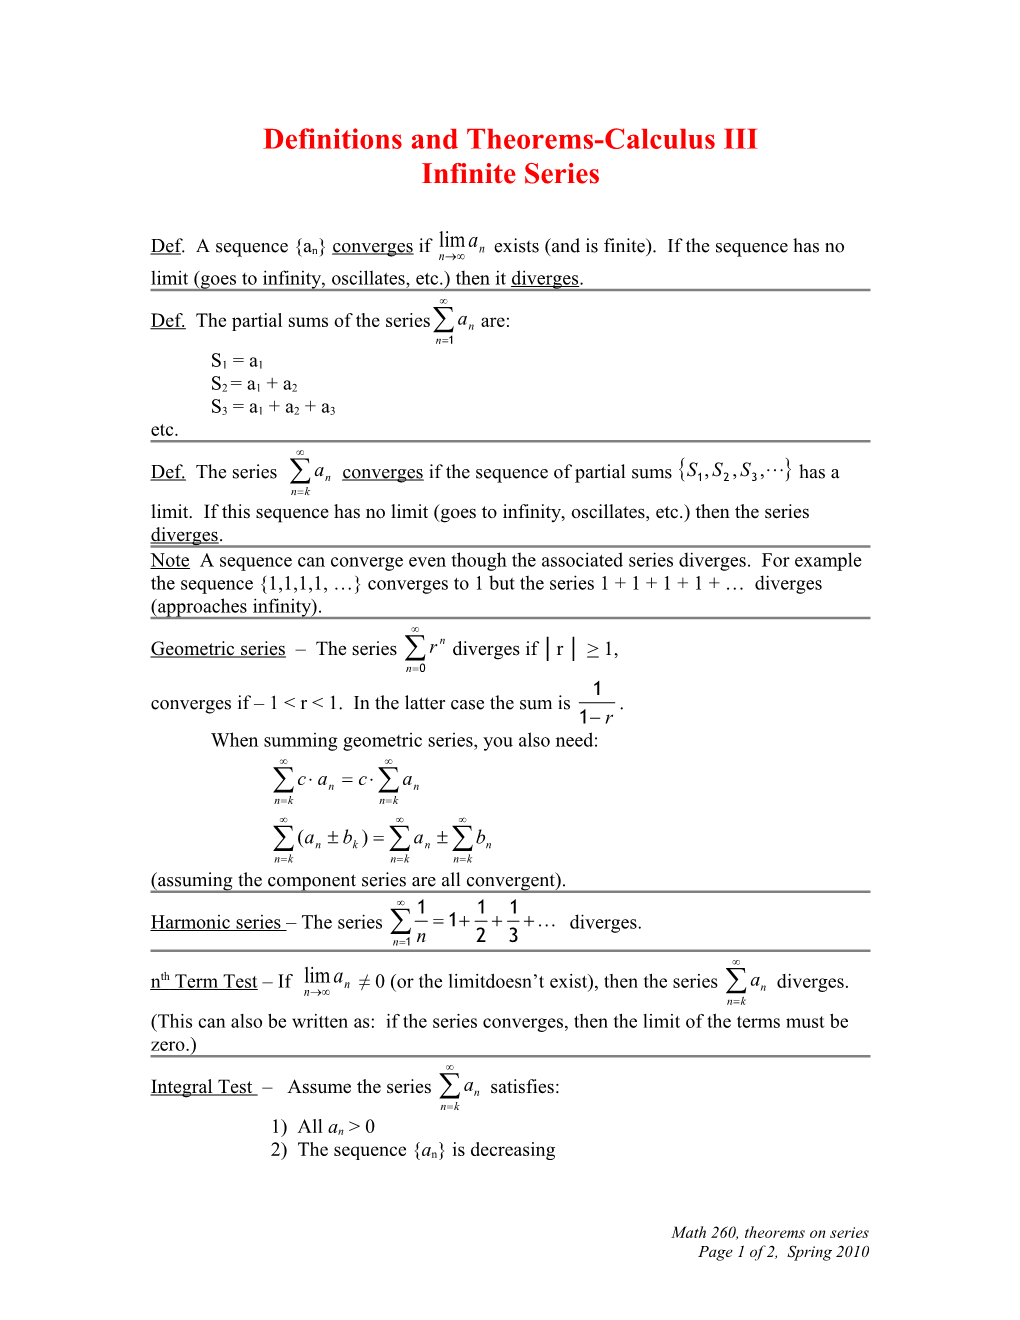 Definitions and Theorems-Calculus III